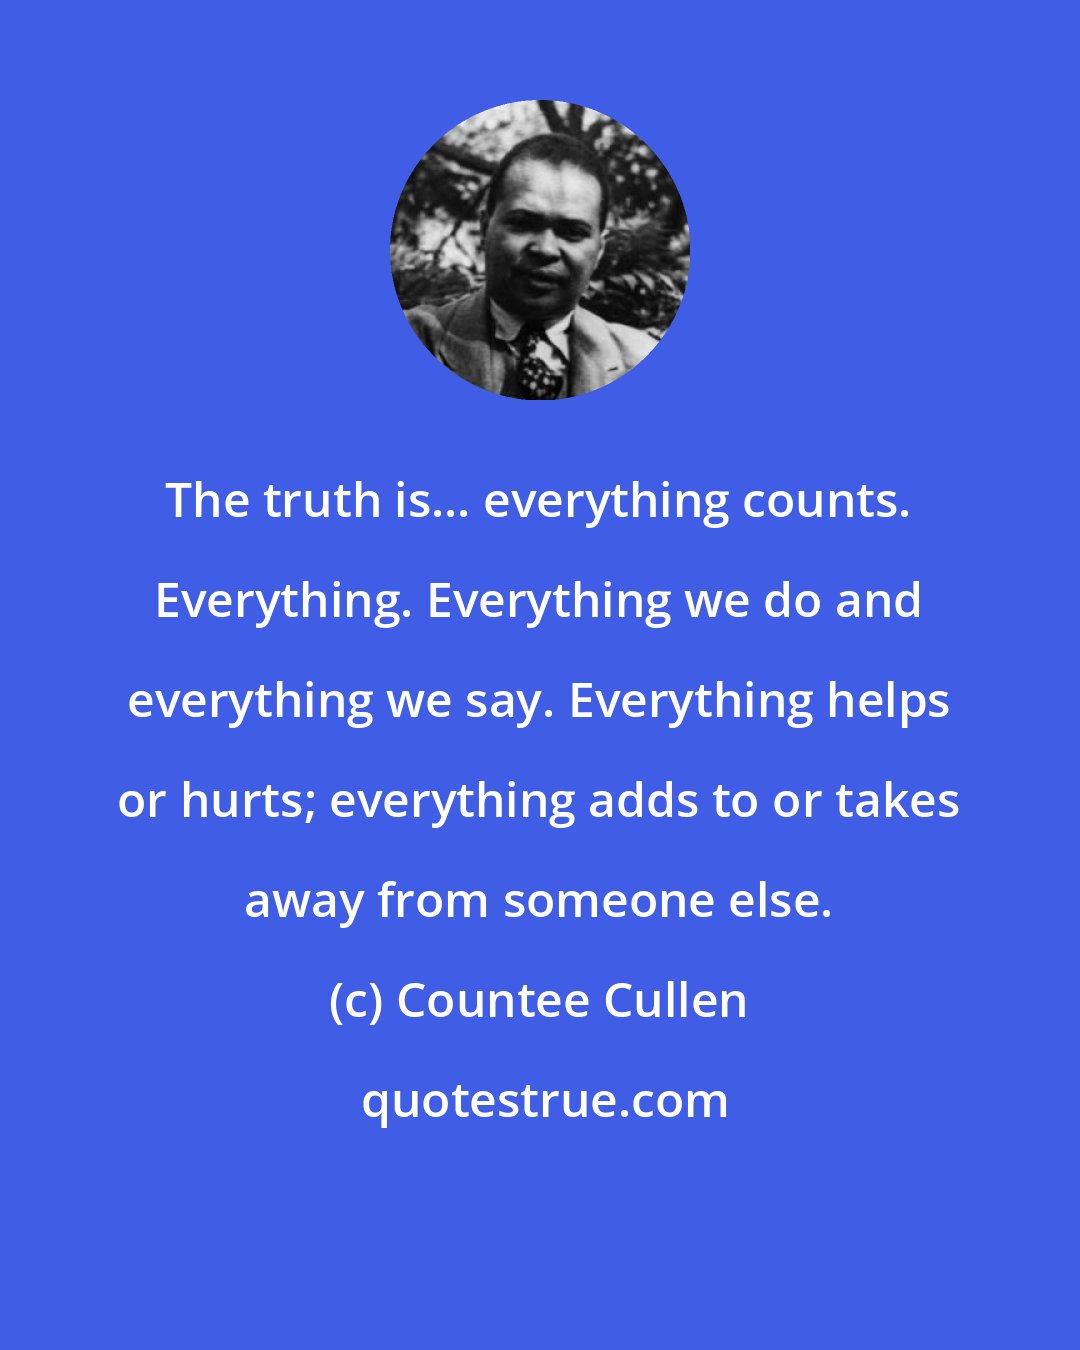 Countee Cullen: The truth is... everything counts. Everything. Everything we do and everything we say. Everything helps or hurts; everything adds to or takes away from someone else.